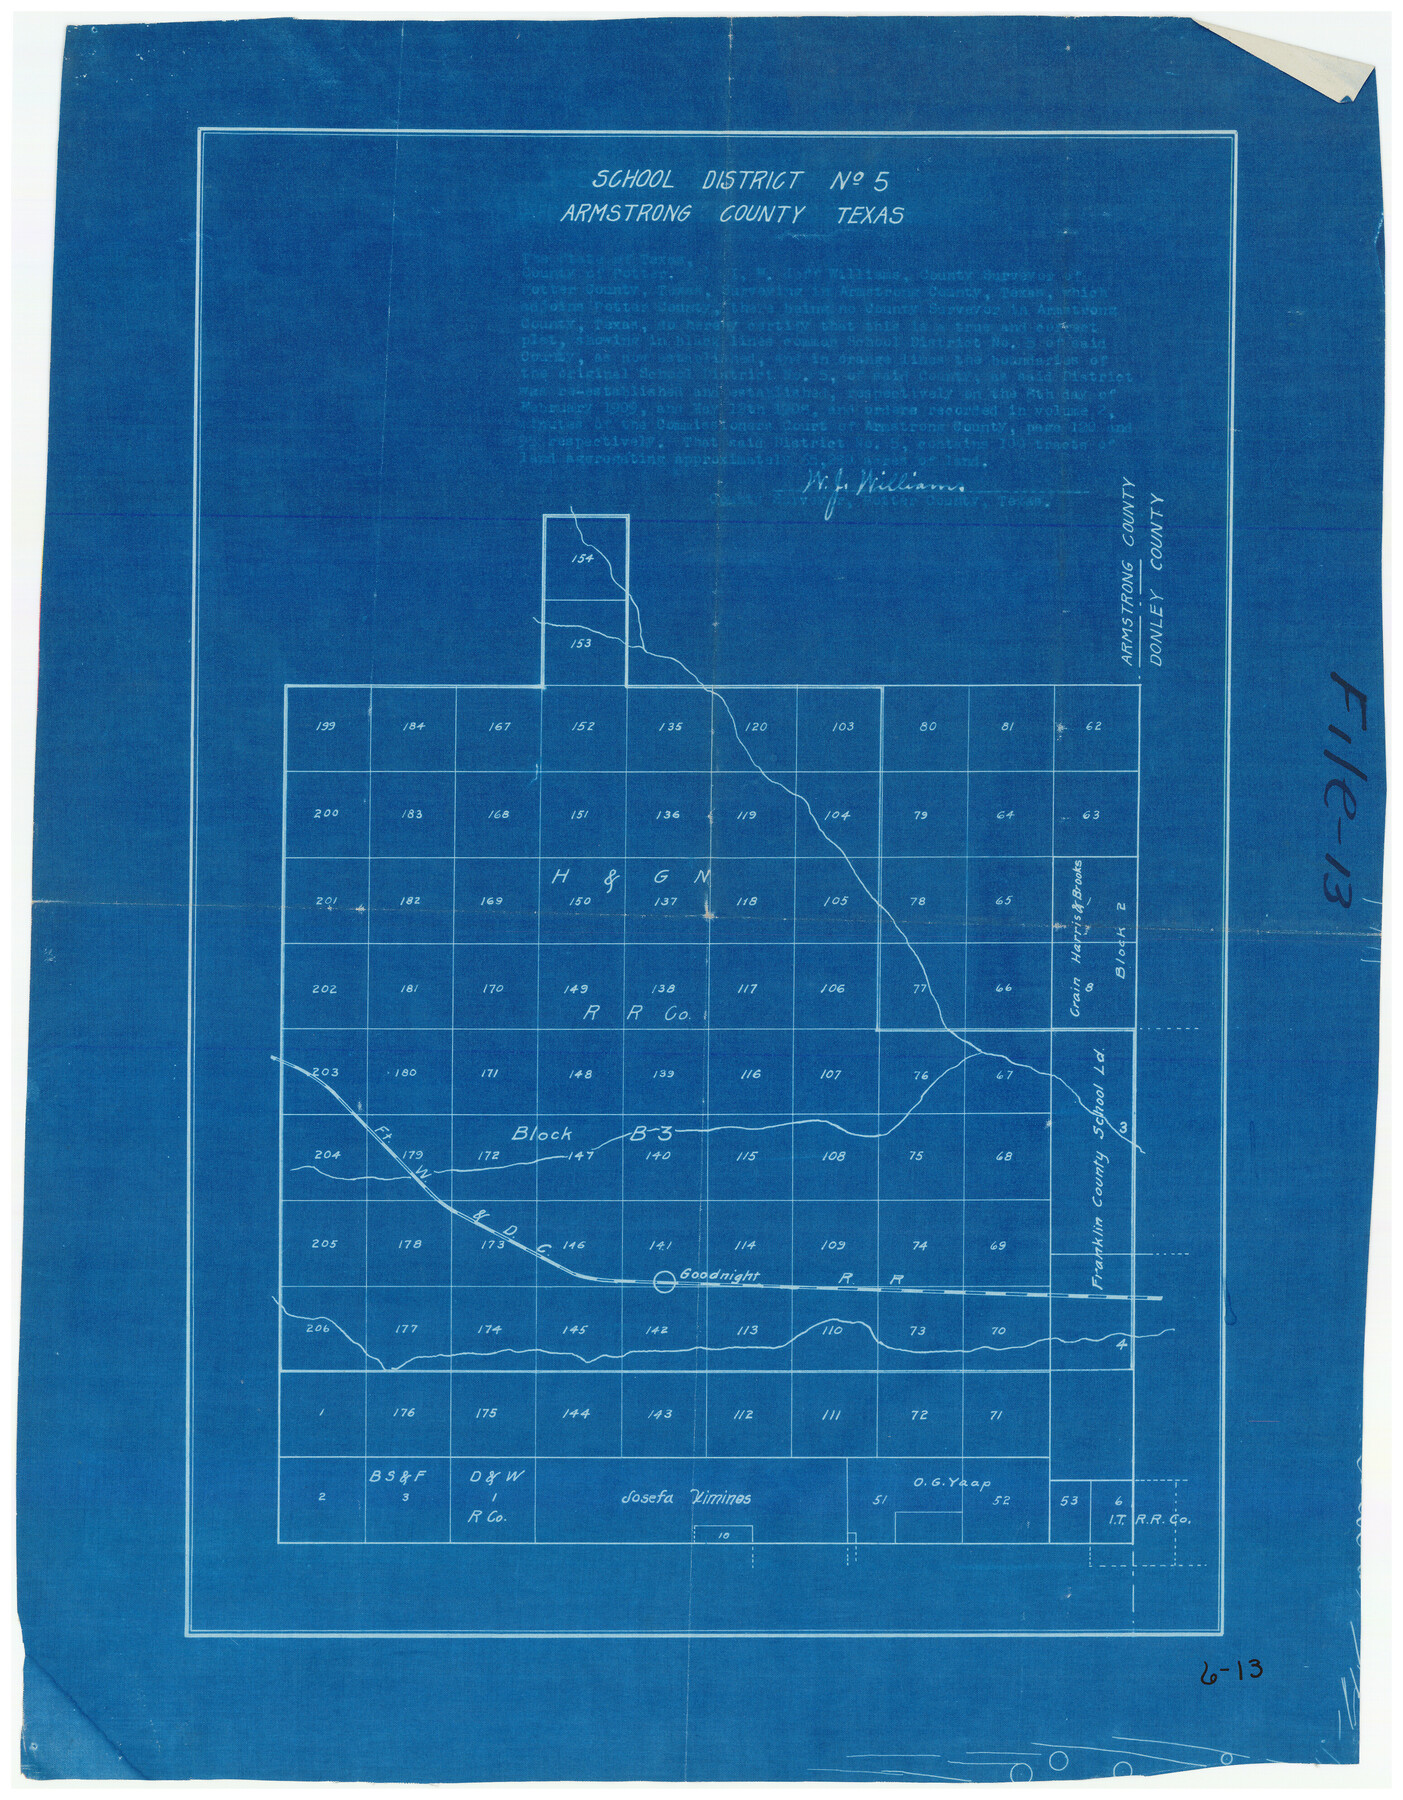 90271, School District No. 5, Armstrong County, Texas, Twichell Survey Records